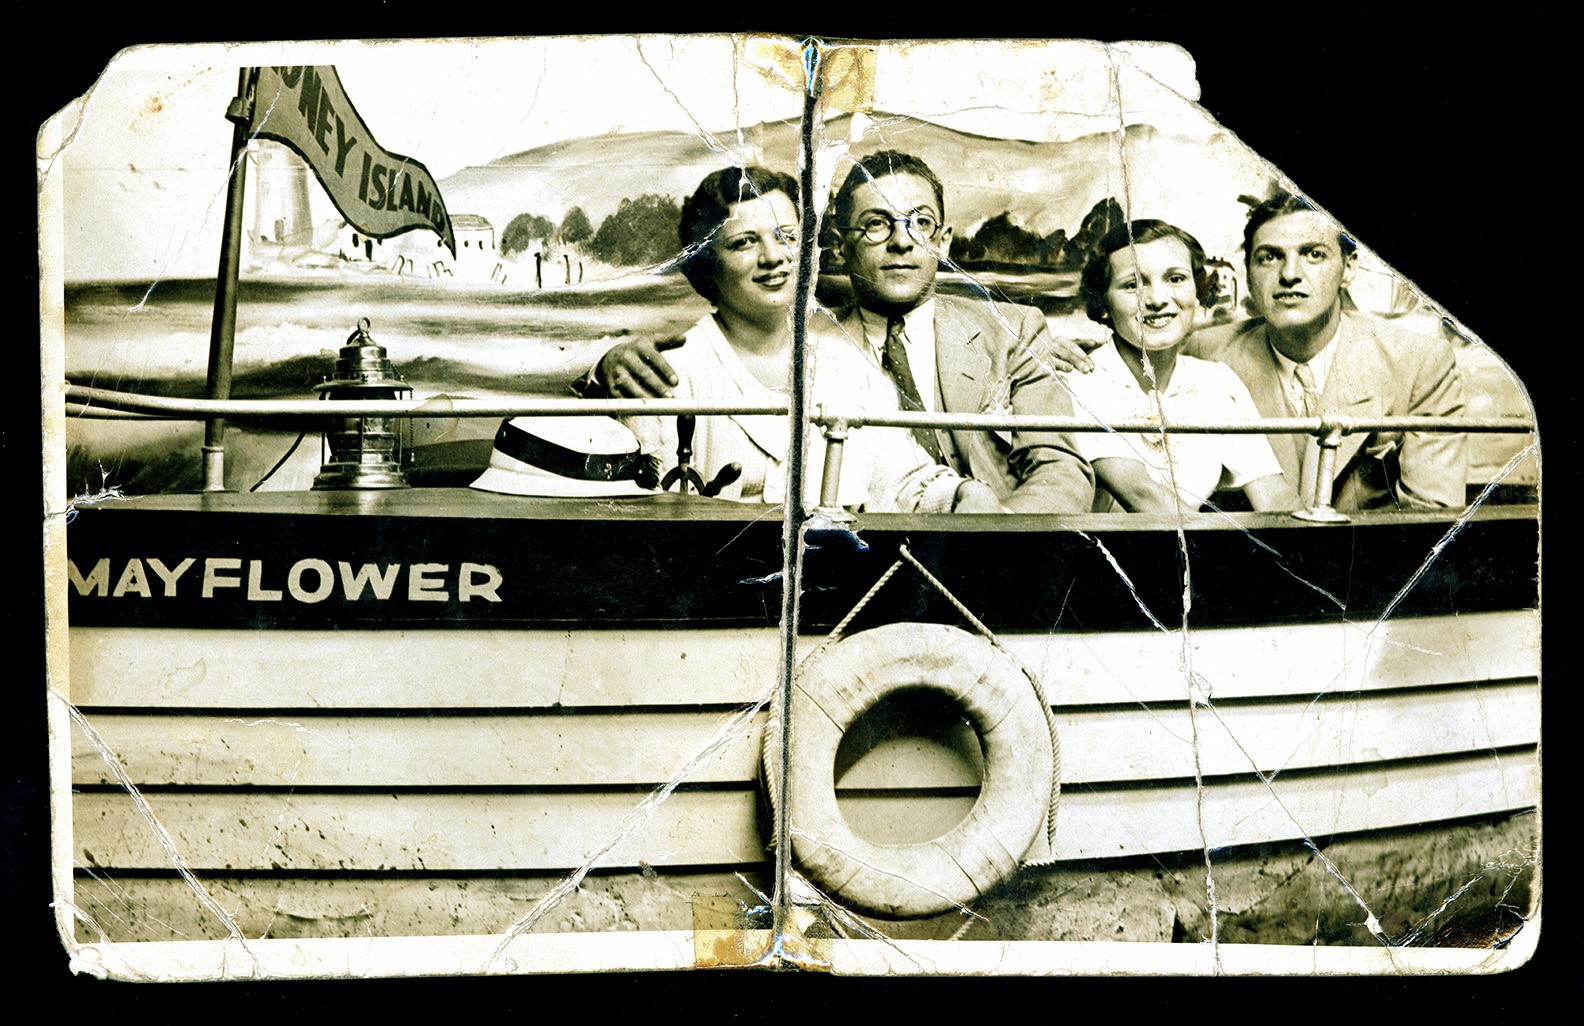 Two couples pose together in a "Mayflower" boat prop at Coney Island in the early 1900s